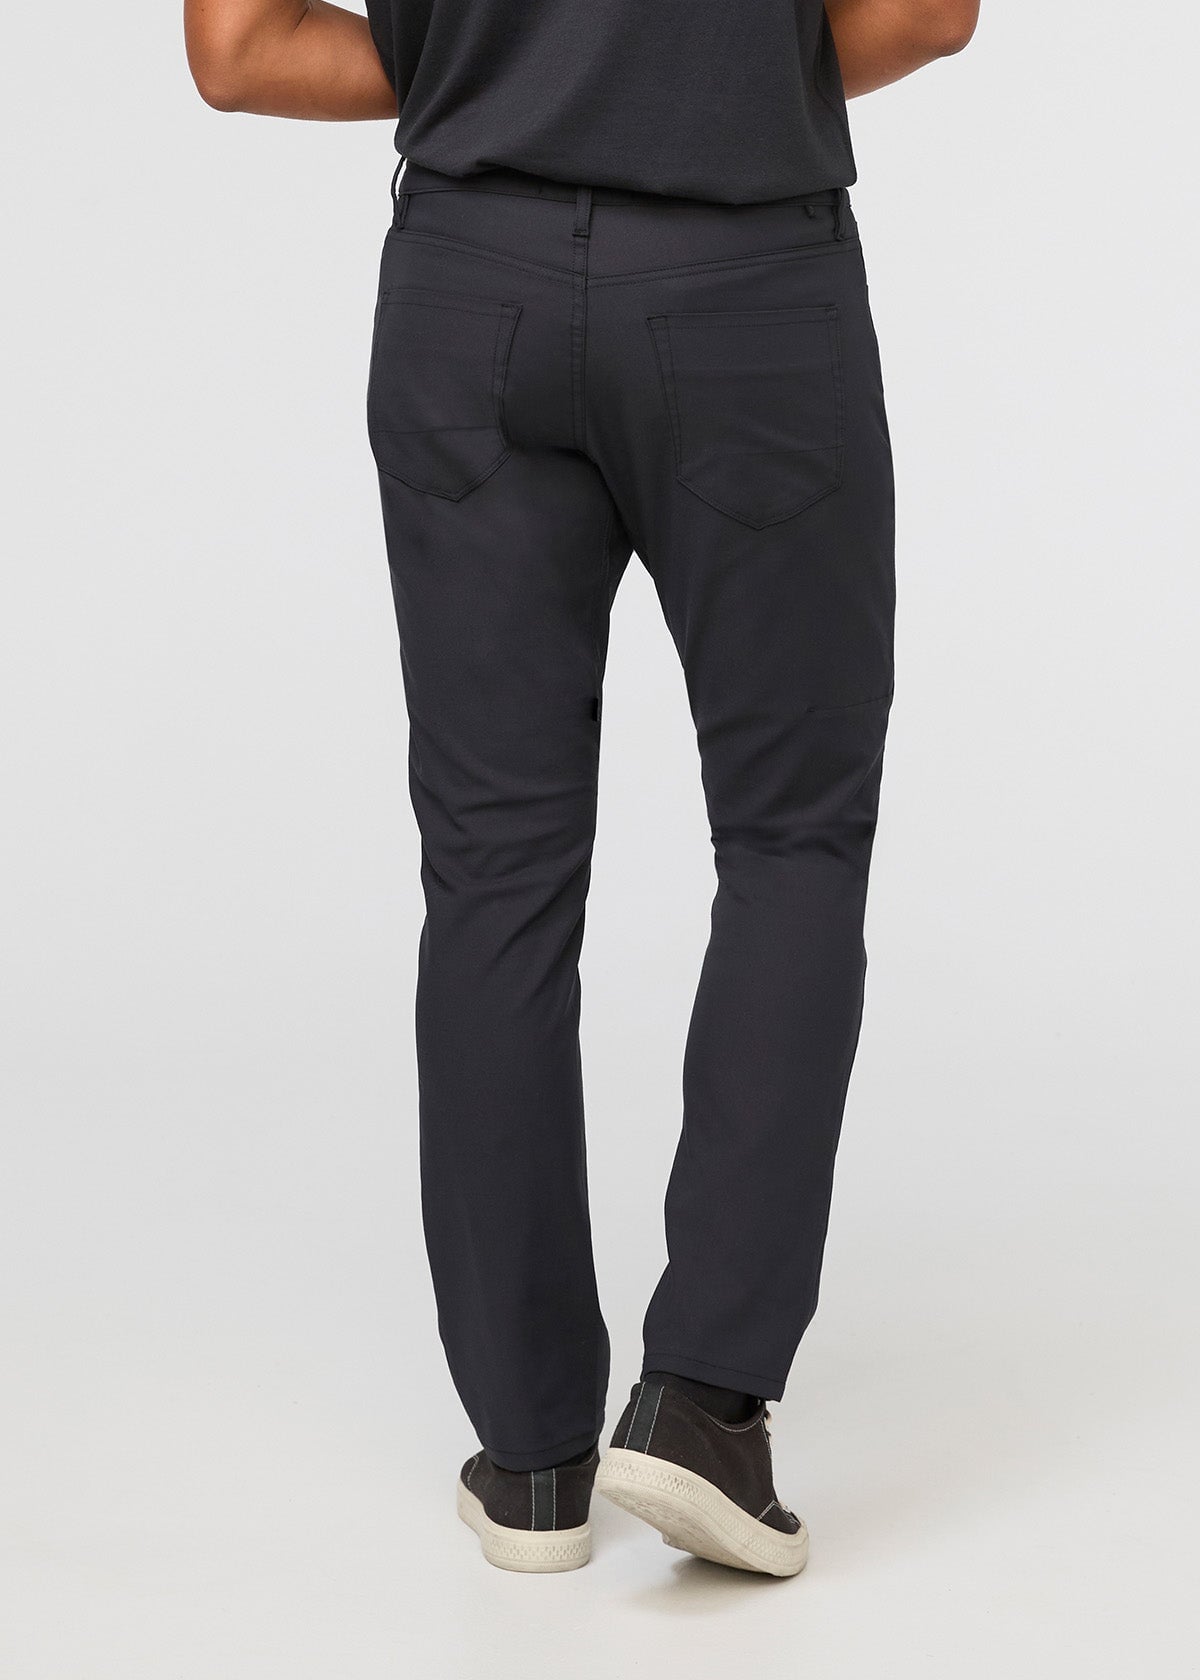 Causal Slim Fitted Pants – HIYENZ